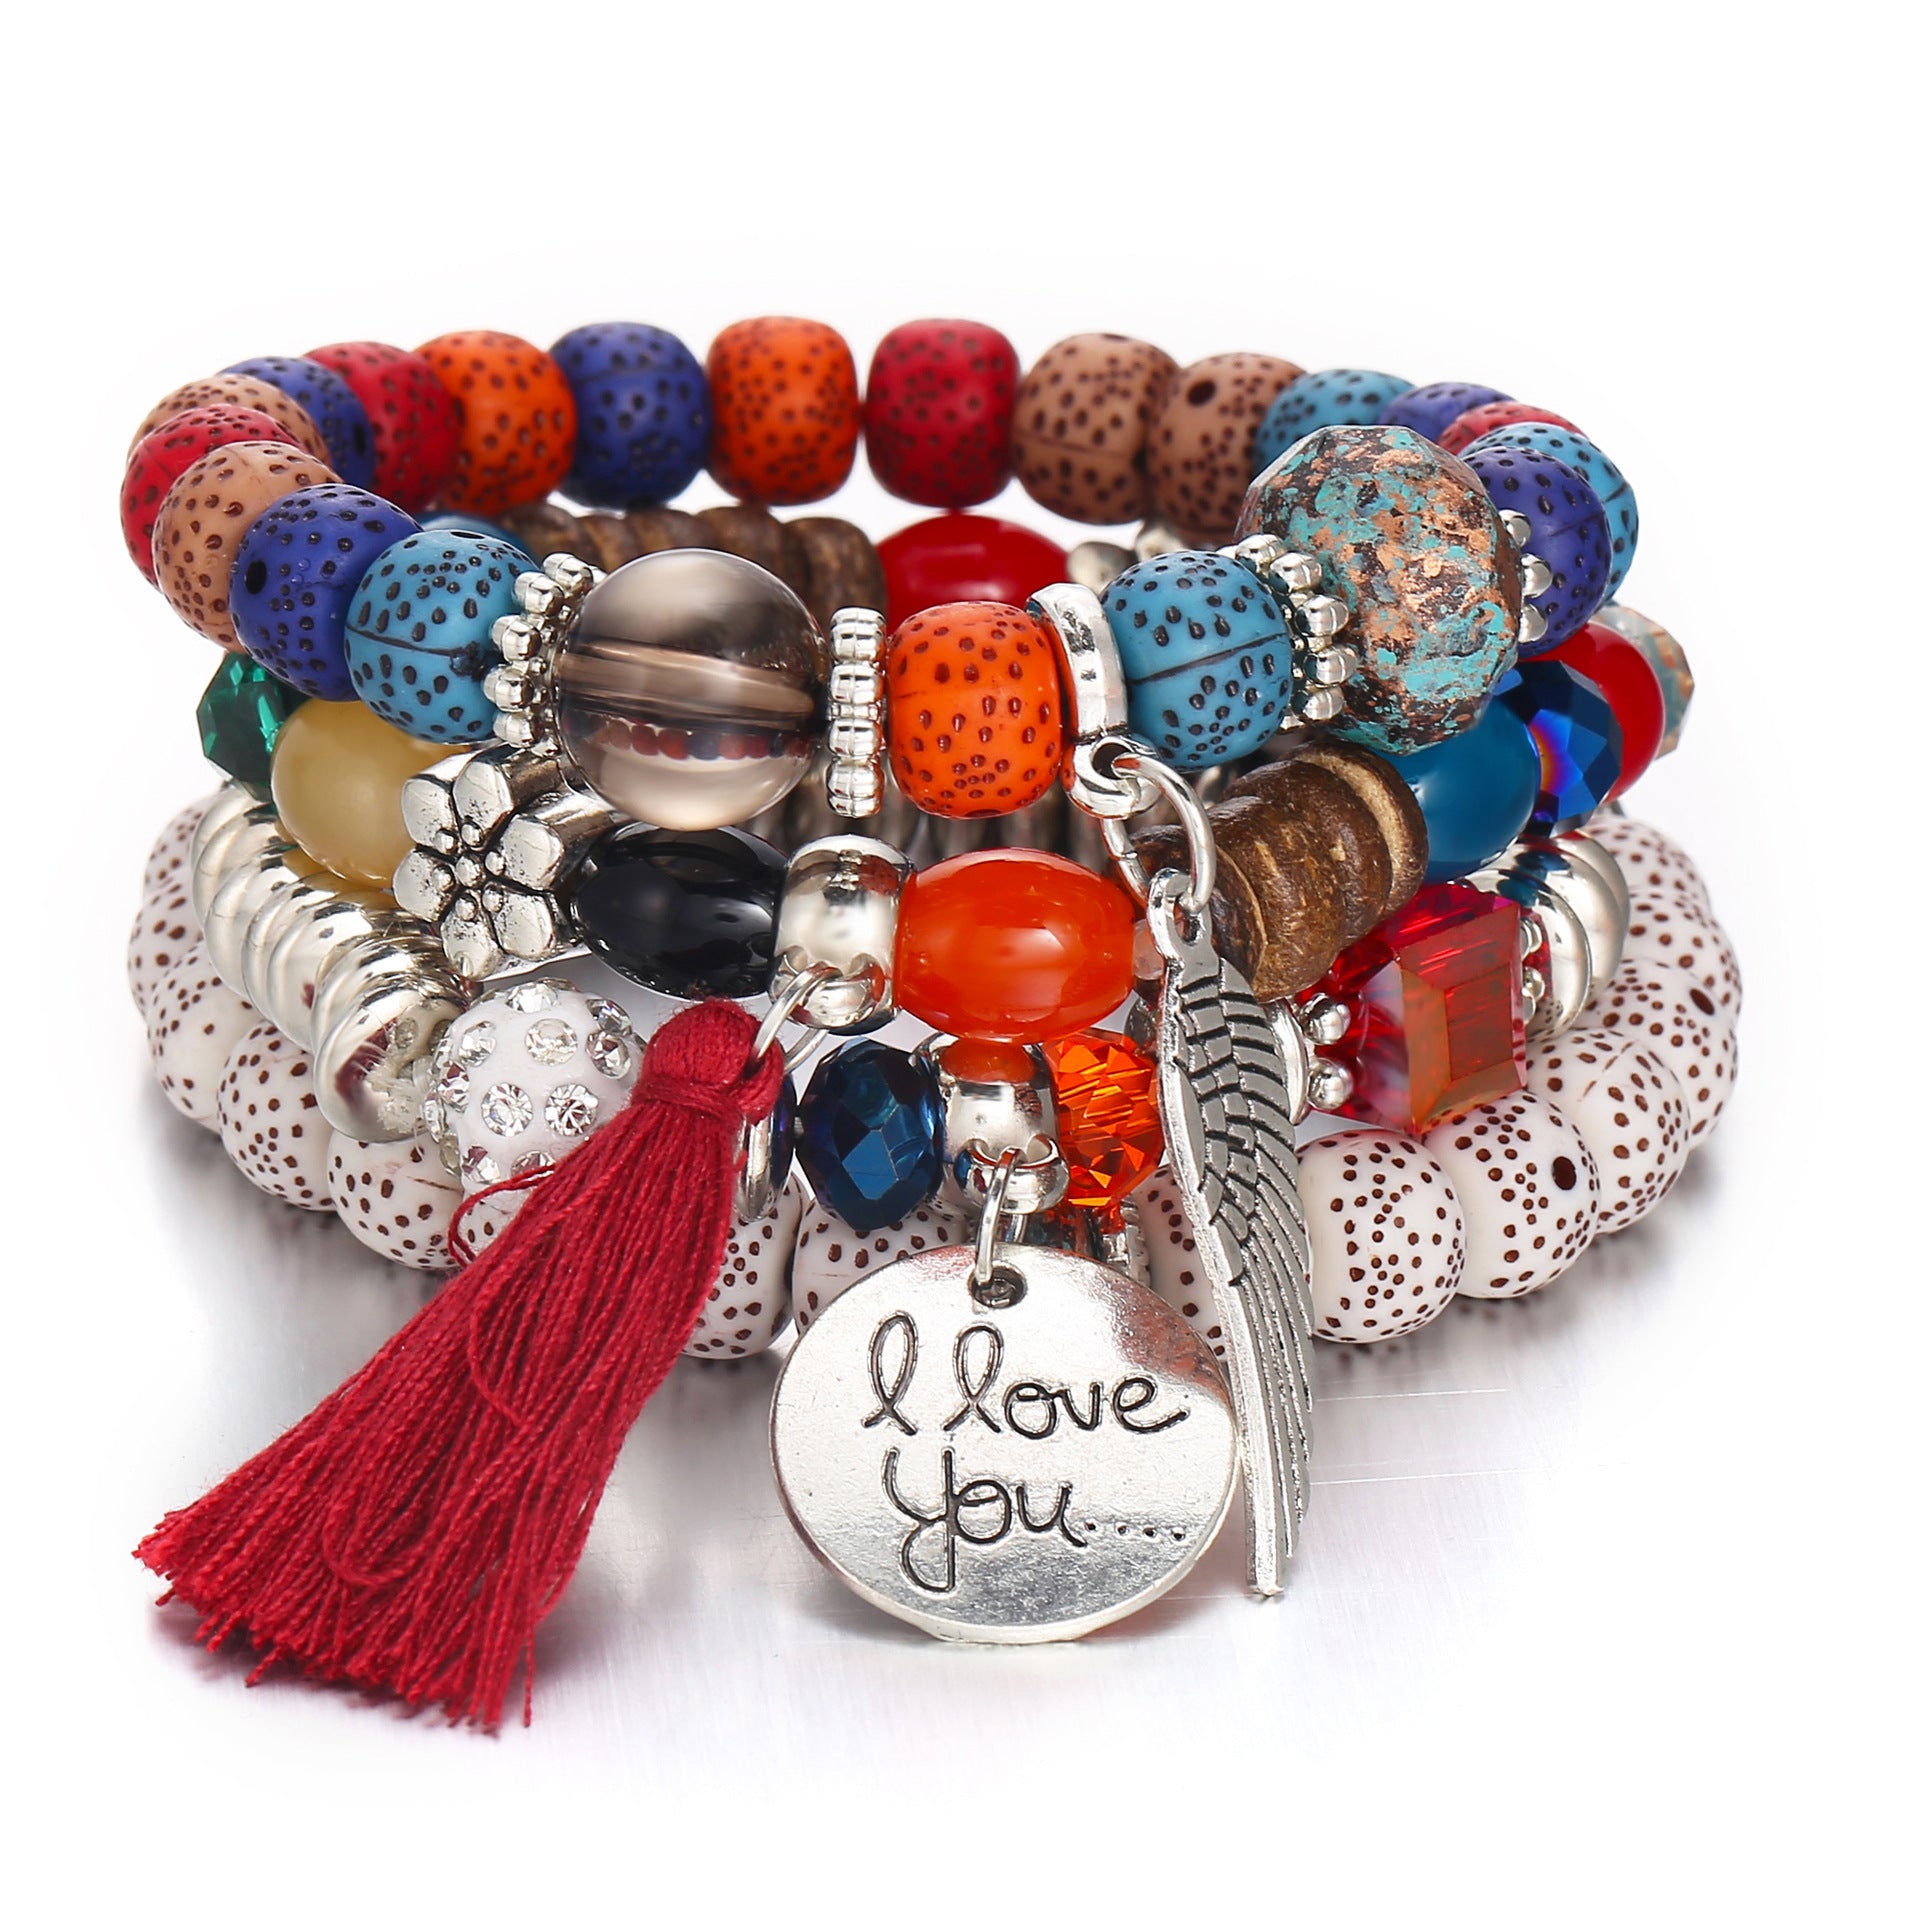 Woven Beads Chain Leather Cuff Bracelet w/ I Love You Pendant - Multicolored